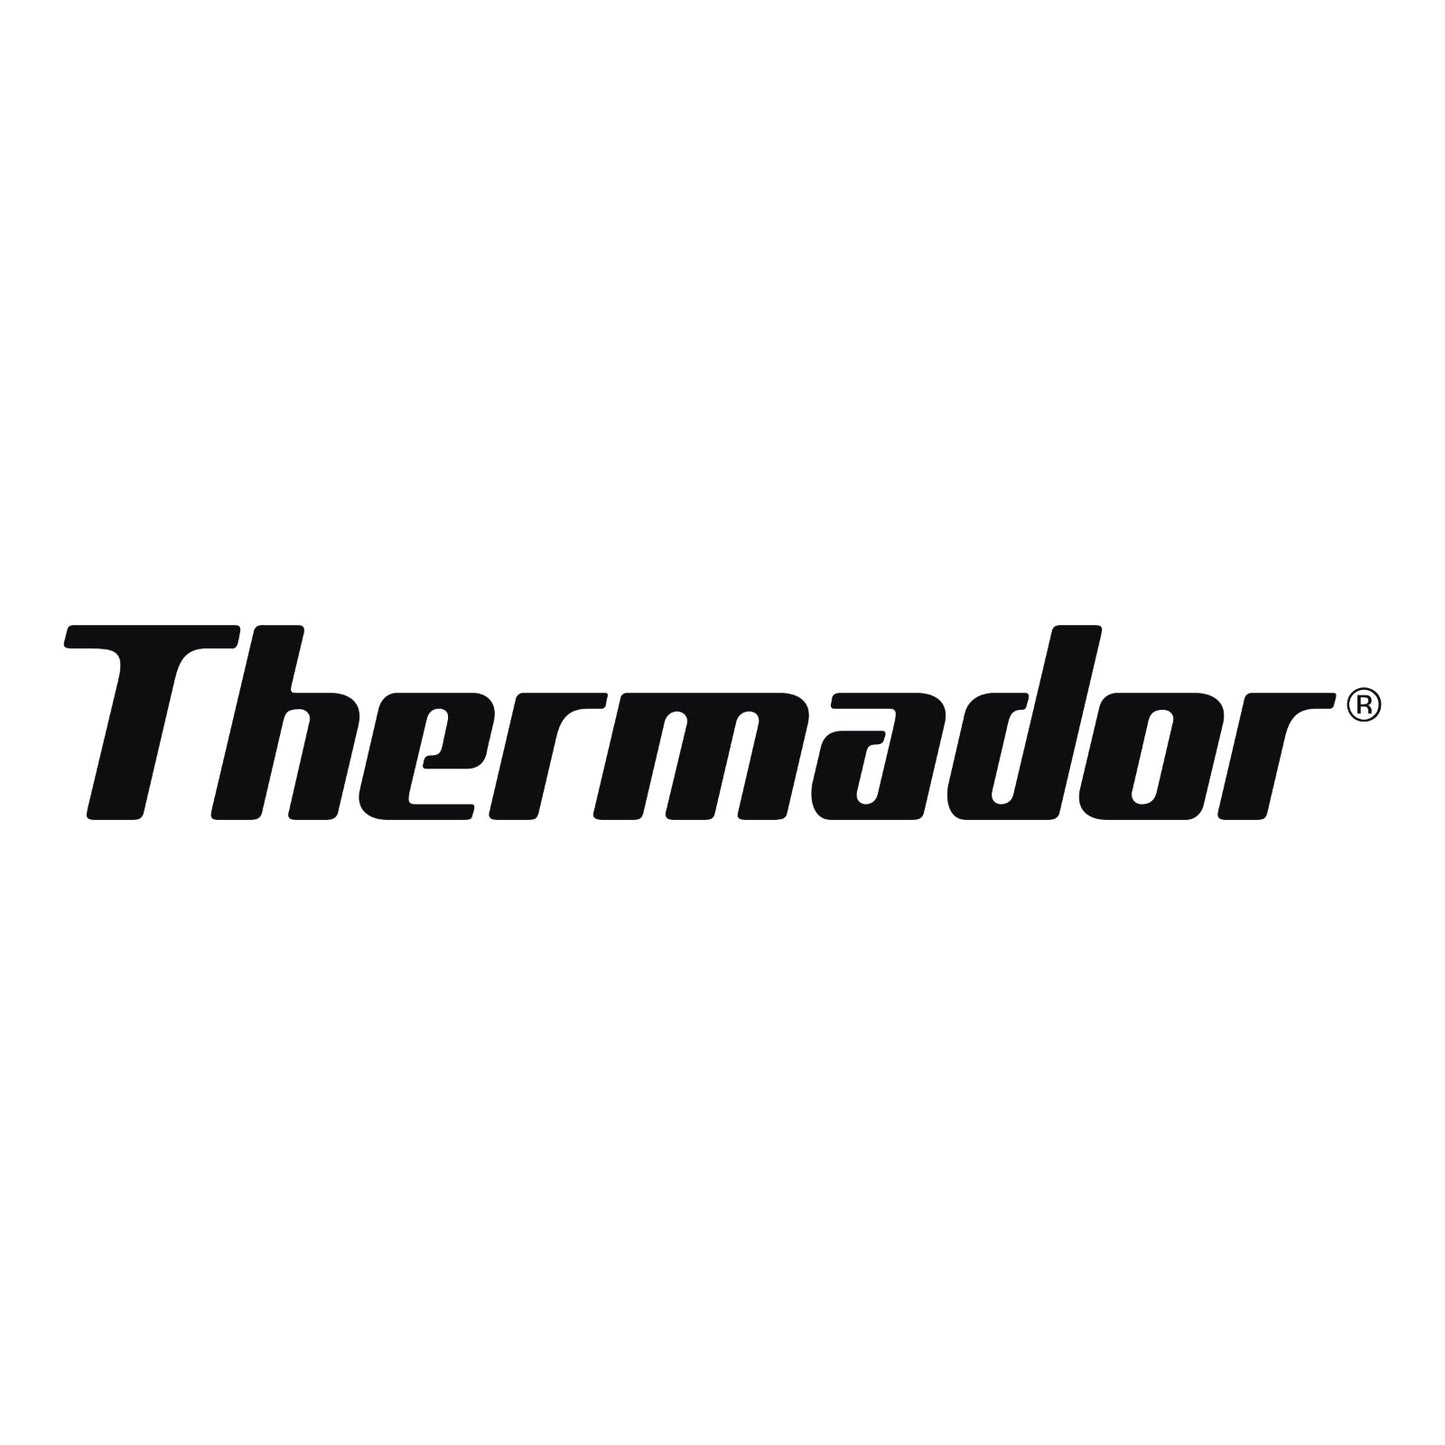 Genuine OEM Replacement for Thermador Oven Control 00N21720206